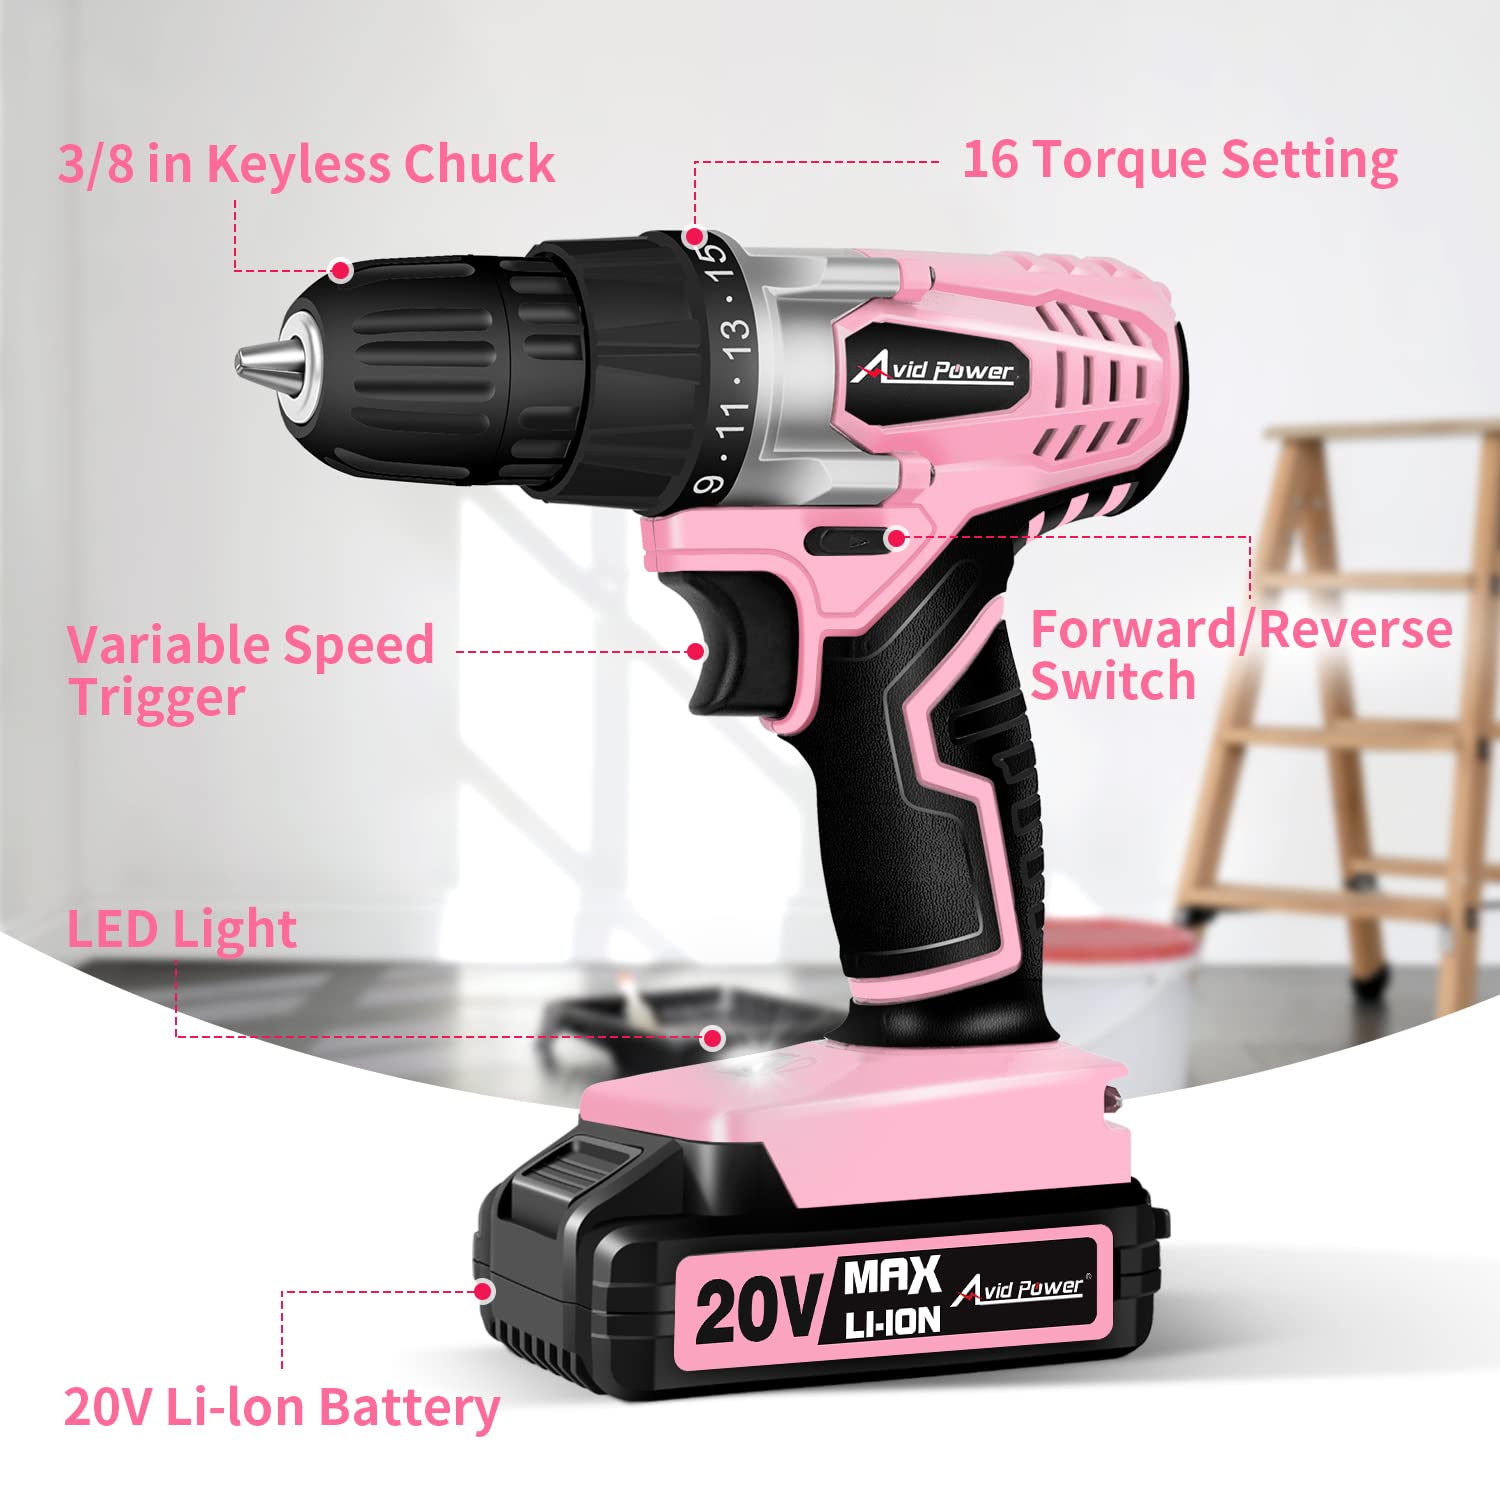 AVID POWER 20V MAX Lithium lon Cordless Drill Set, Power Drill Kit with Battery and Charger, 3/8-Inch Keyless Chuck, Variable Speed, 16 Position and 22pcs Drill Bits (Pink)